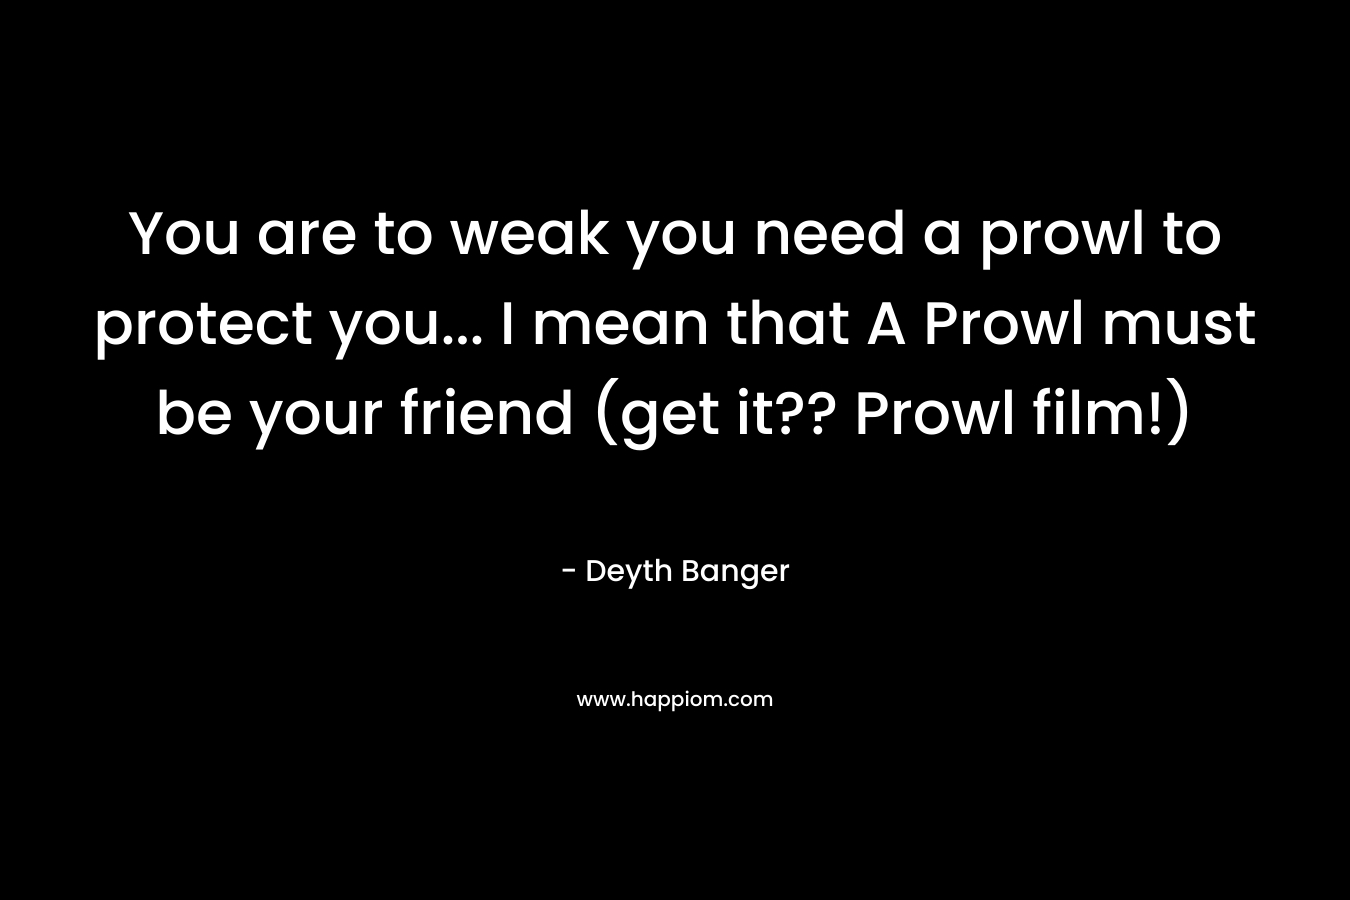 You are to weak you need a prowl to protect you... I mean that A Prowl must be your friend (get it?? Prowl film!)